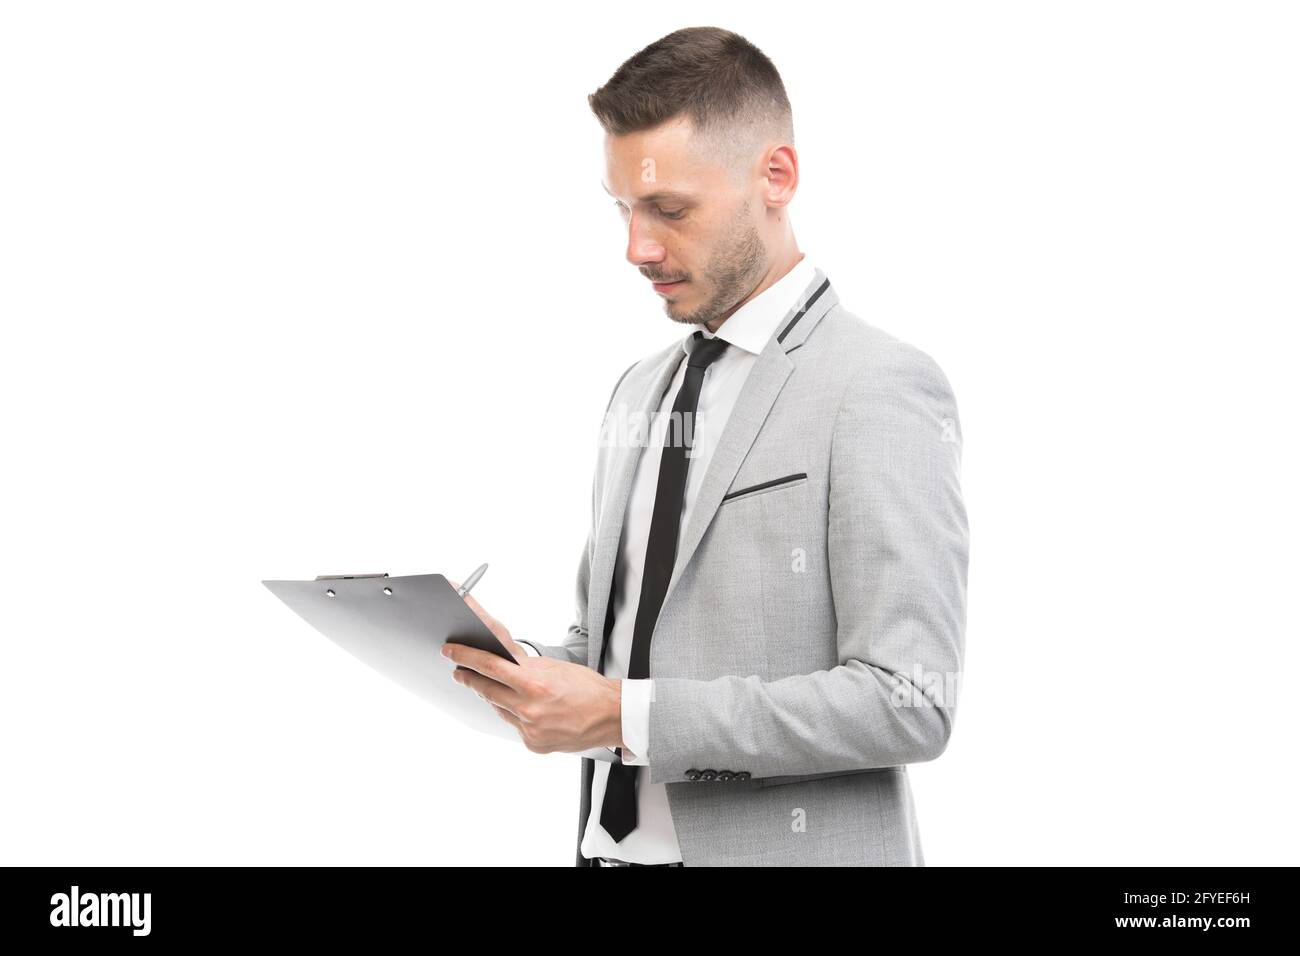 Horizontal medium portrait of handsome young adult Caucasian man wearing gray suit holding clipboard making notes, white background Stock Photo